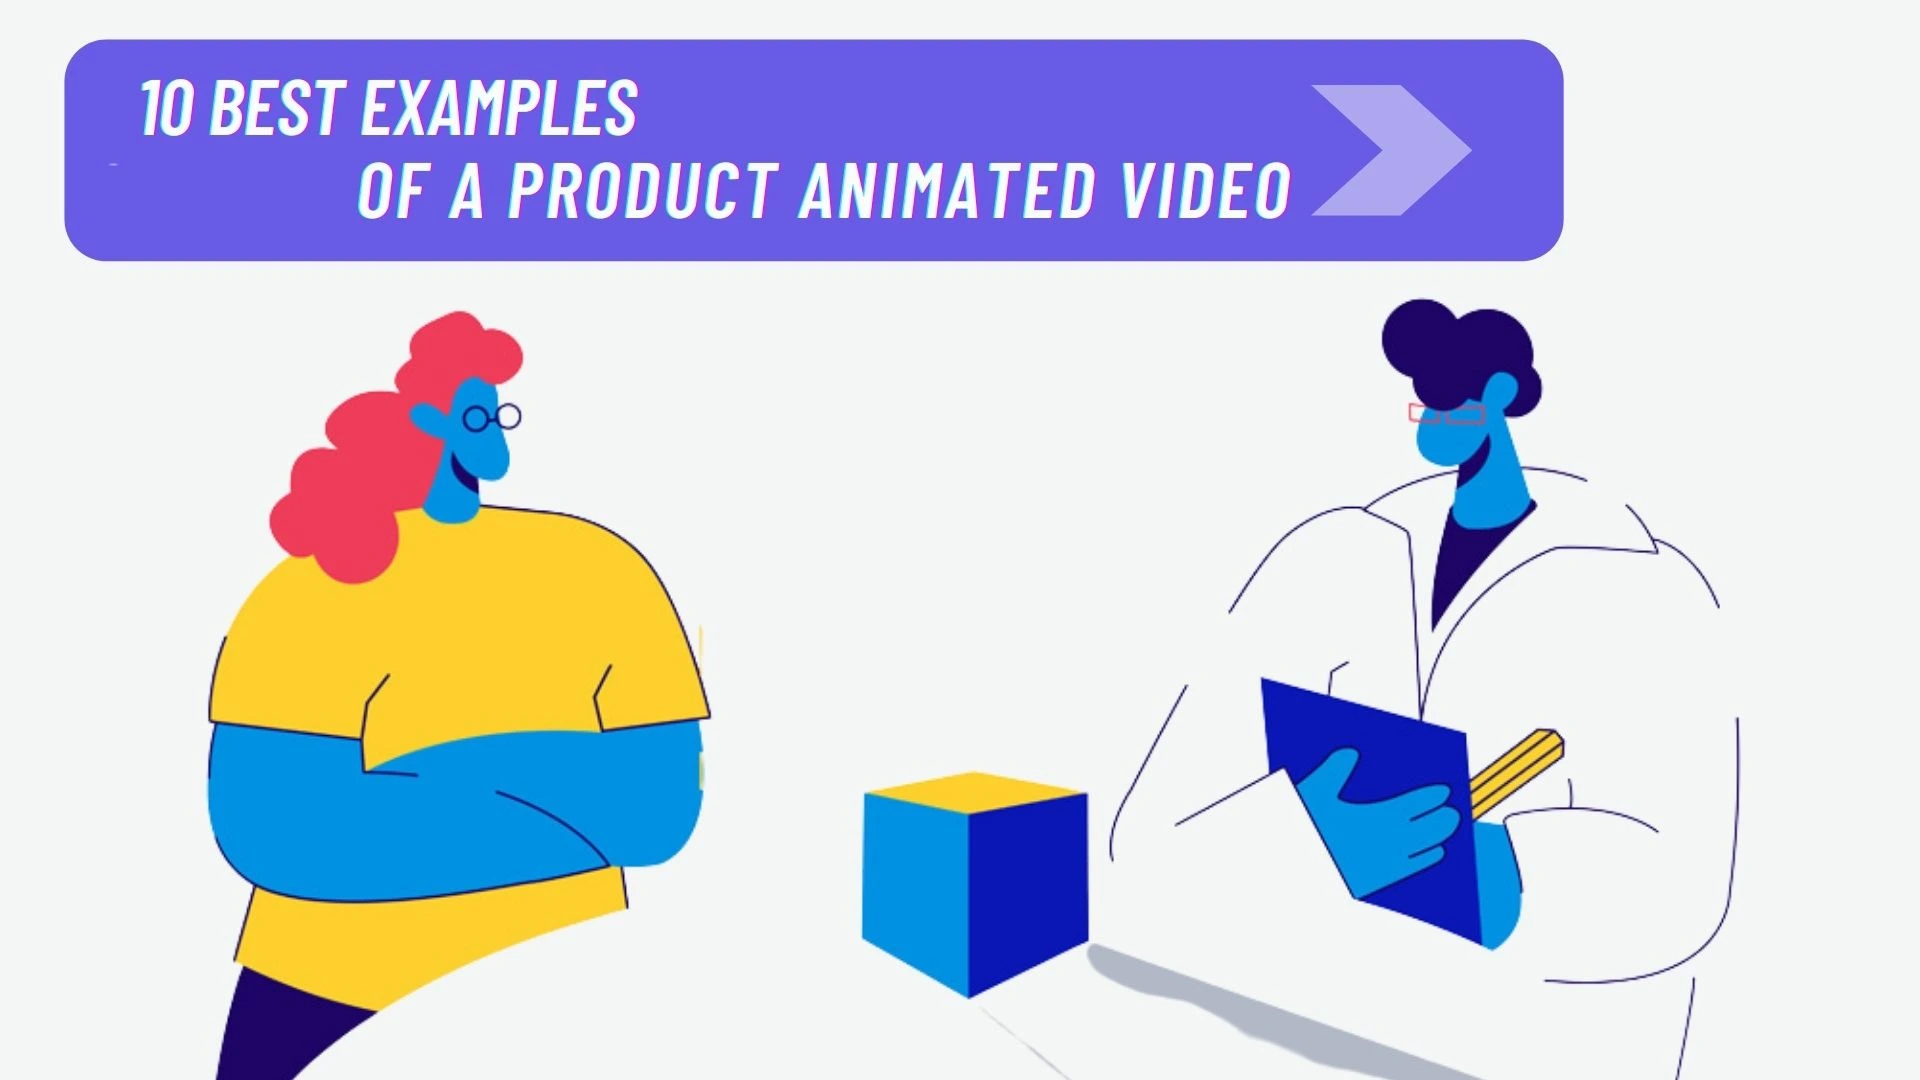 Best Examples of a Product Animated Video